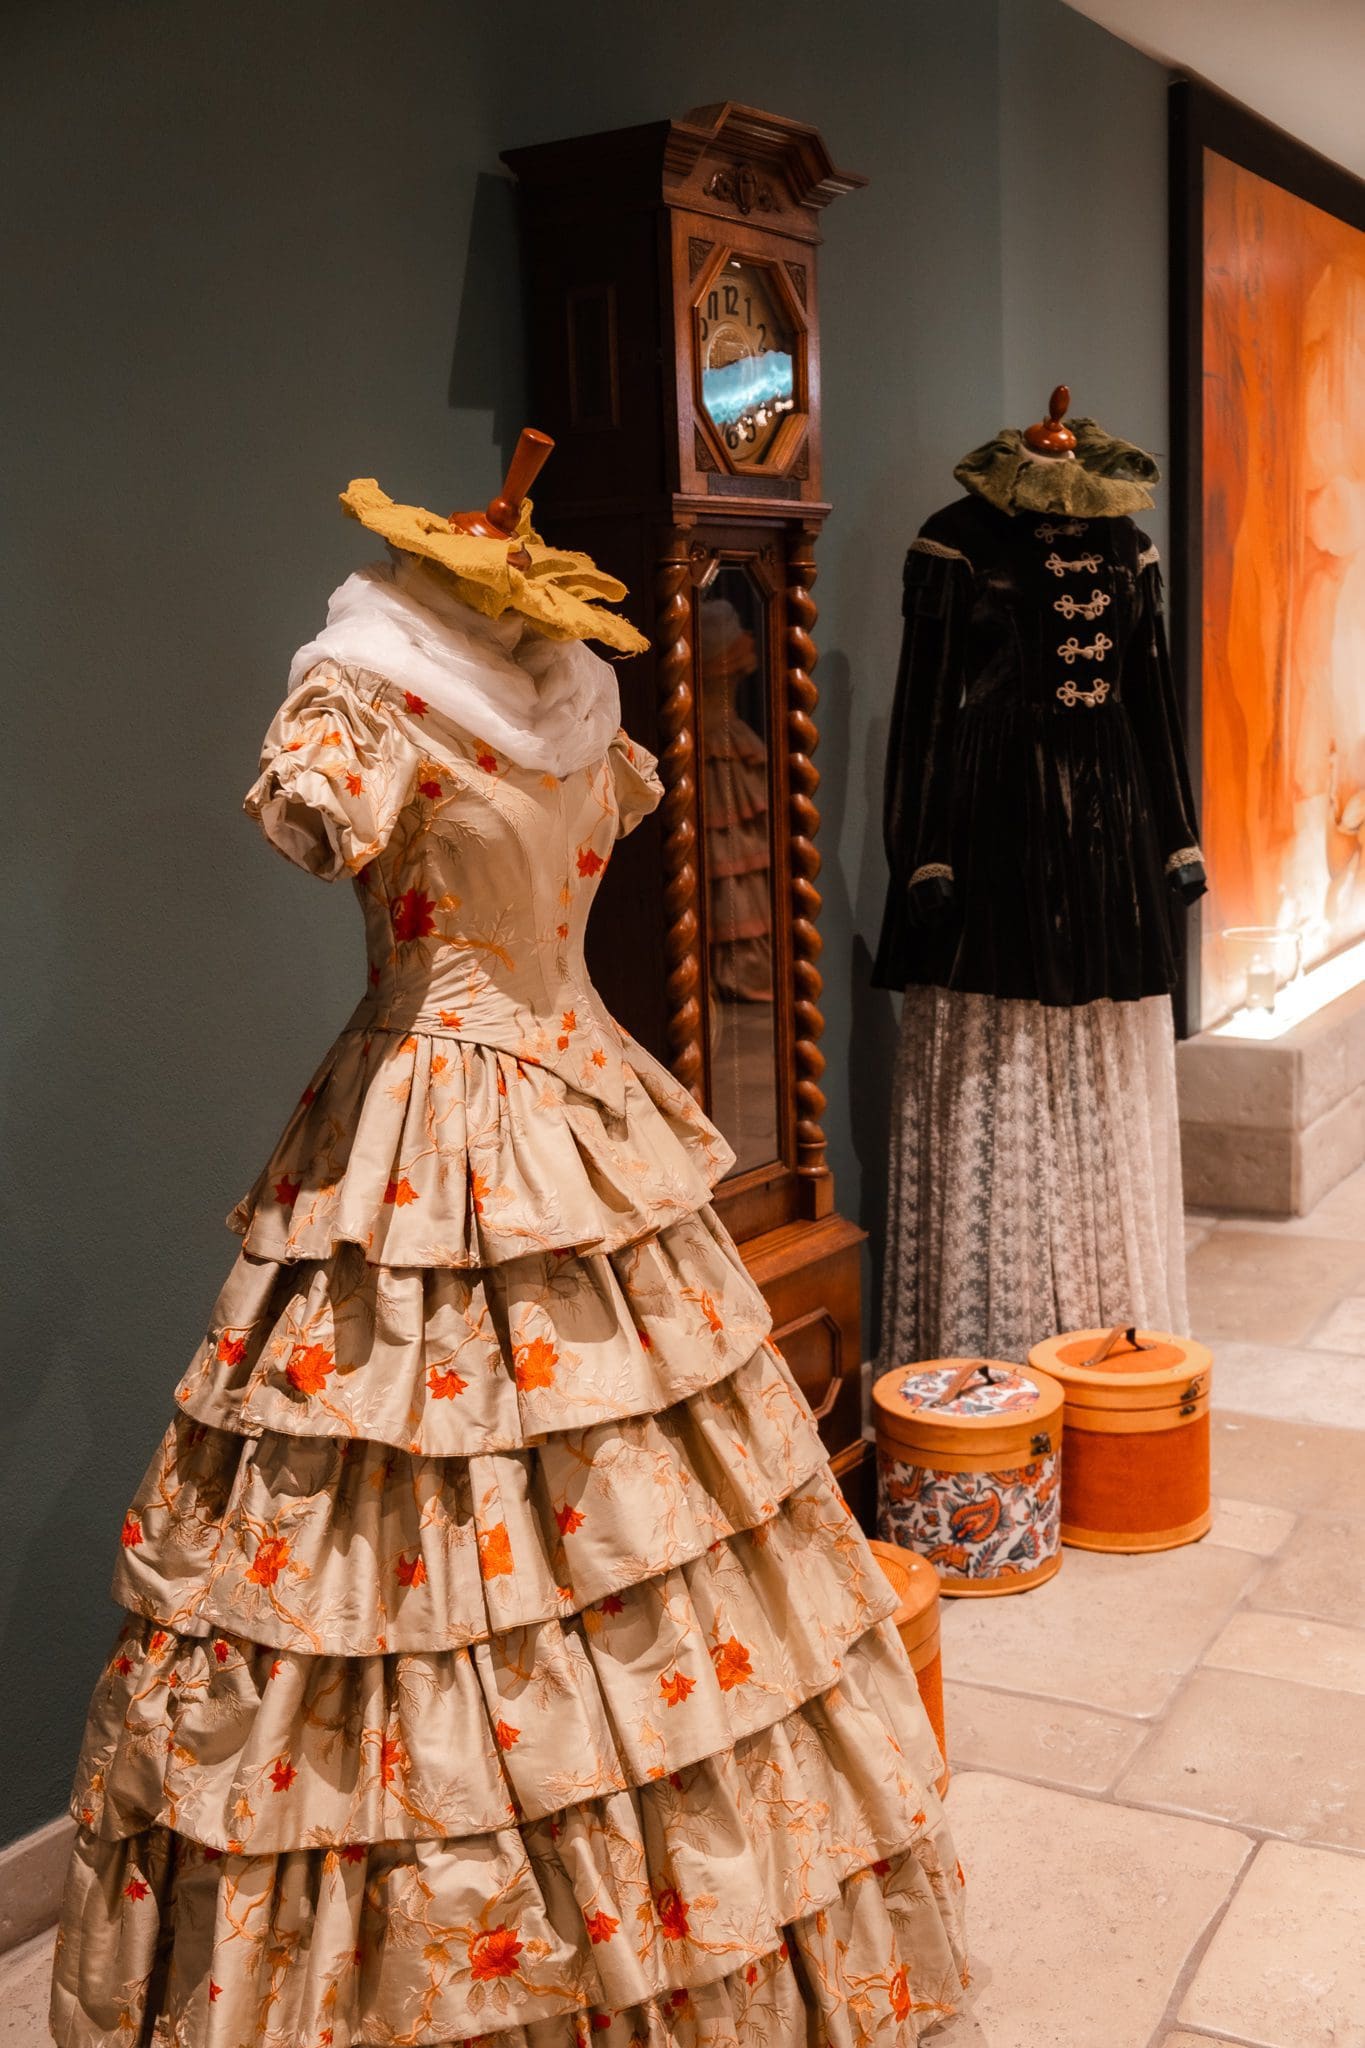 Beautiful dresses from yesteryear on display in Hotel Sonne